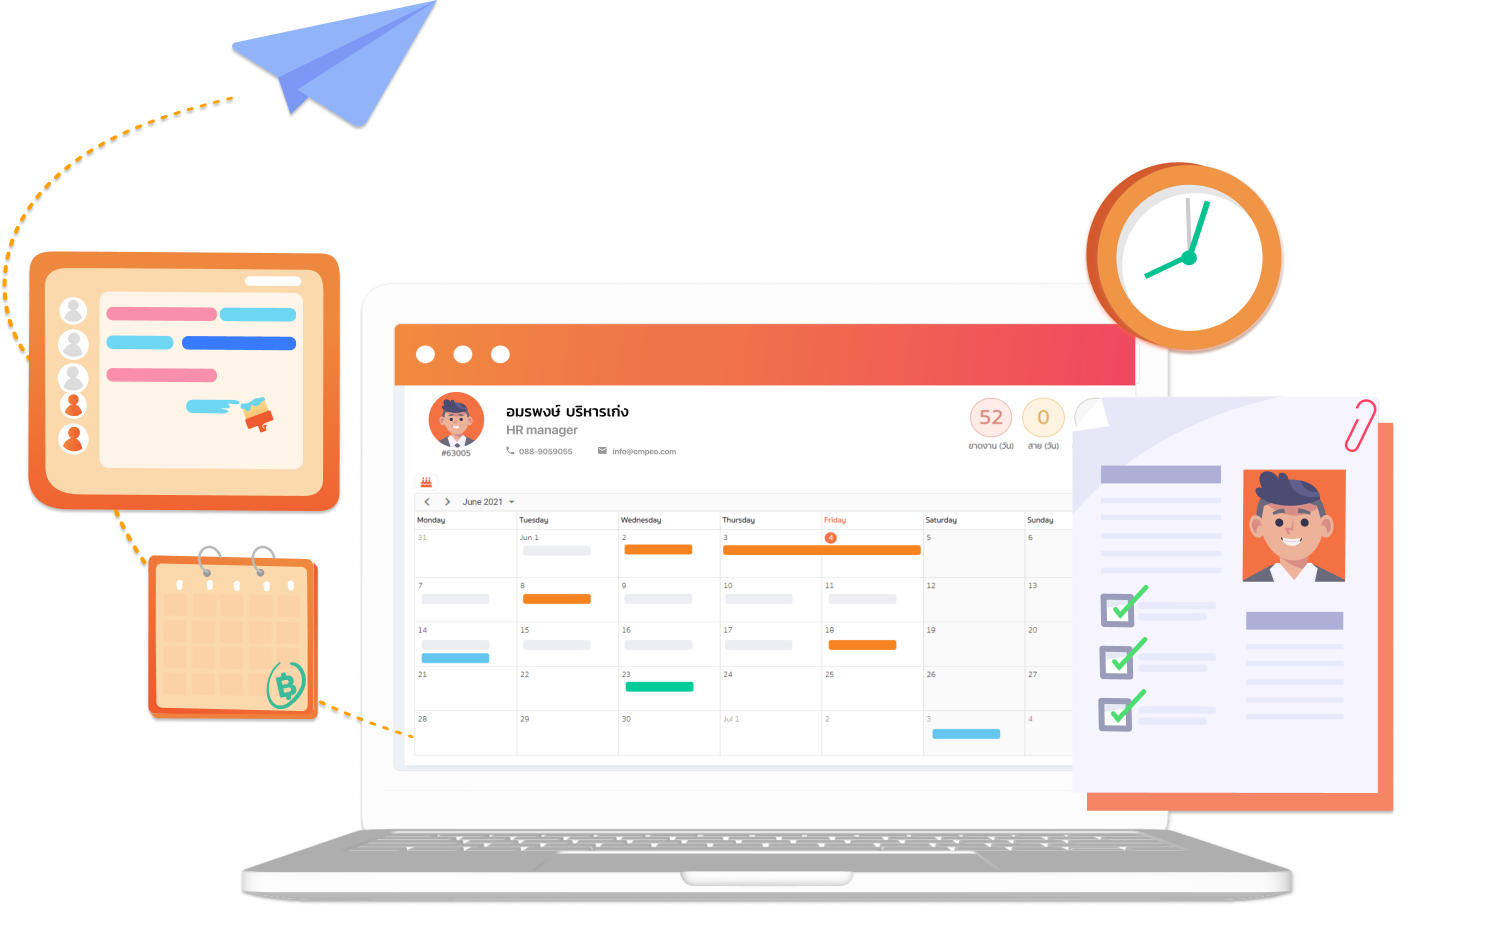 hr software screen with OT, shift, leave management